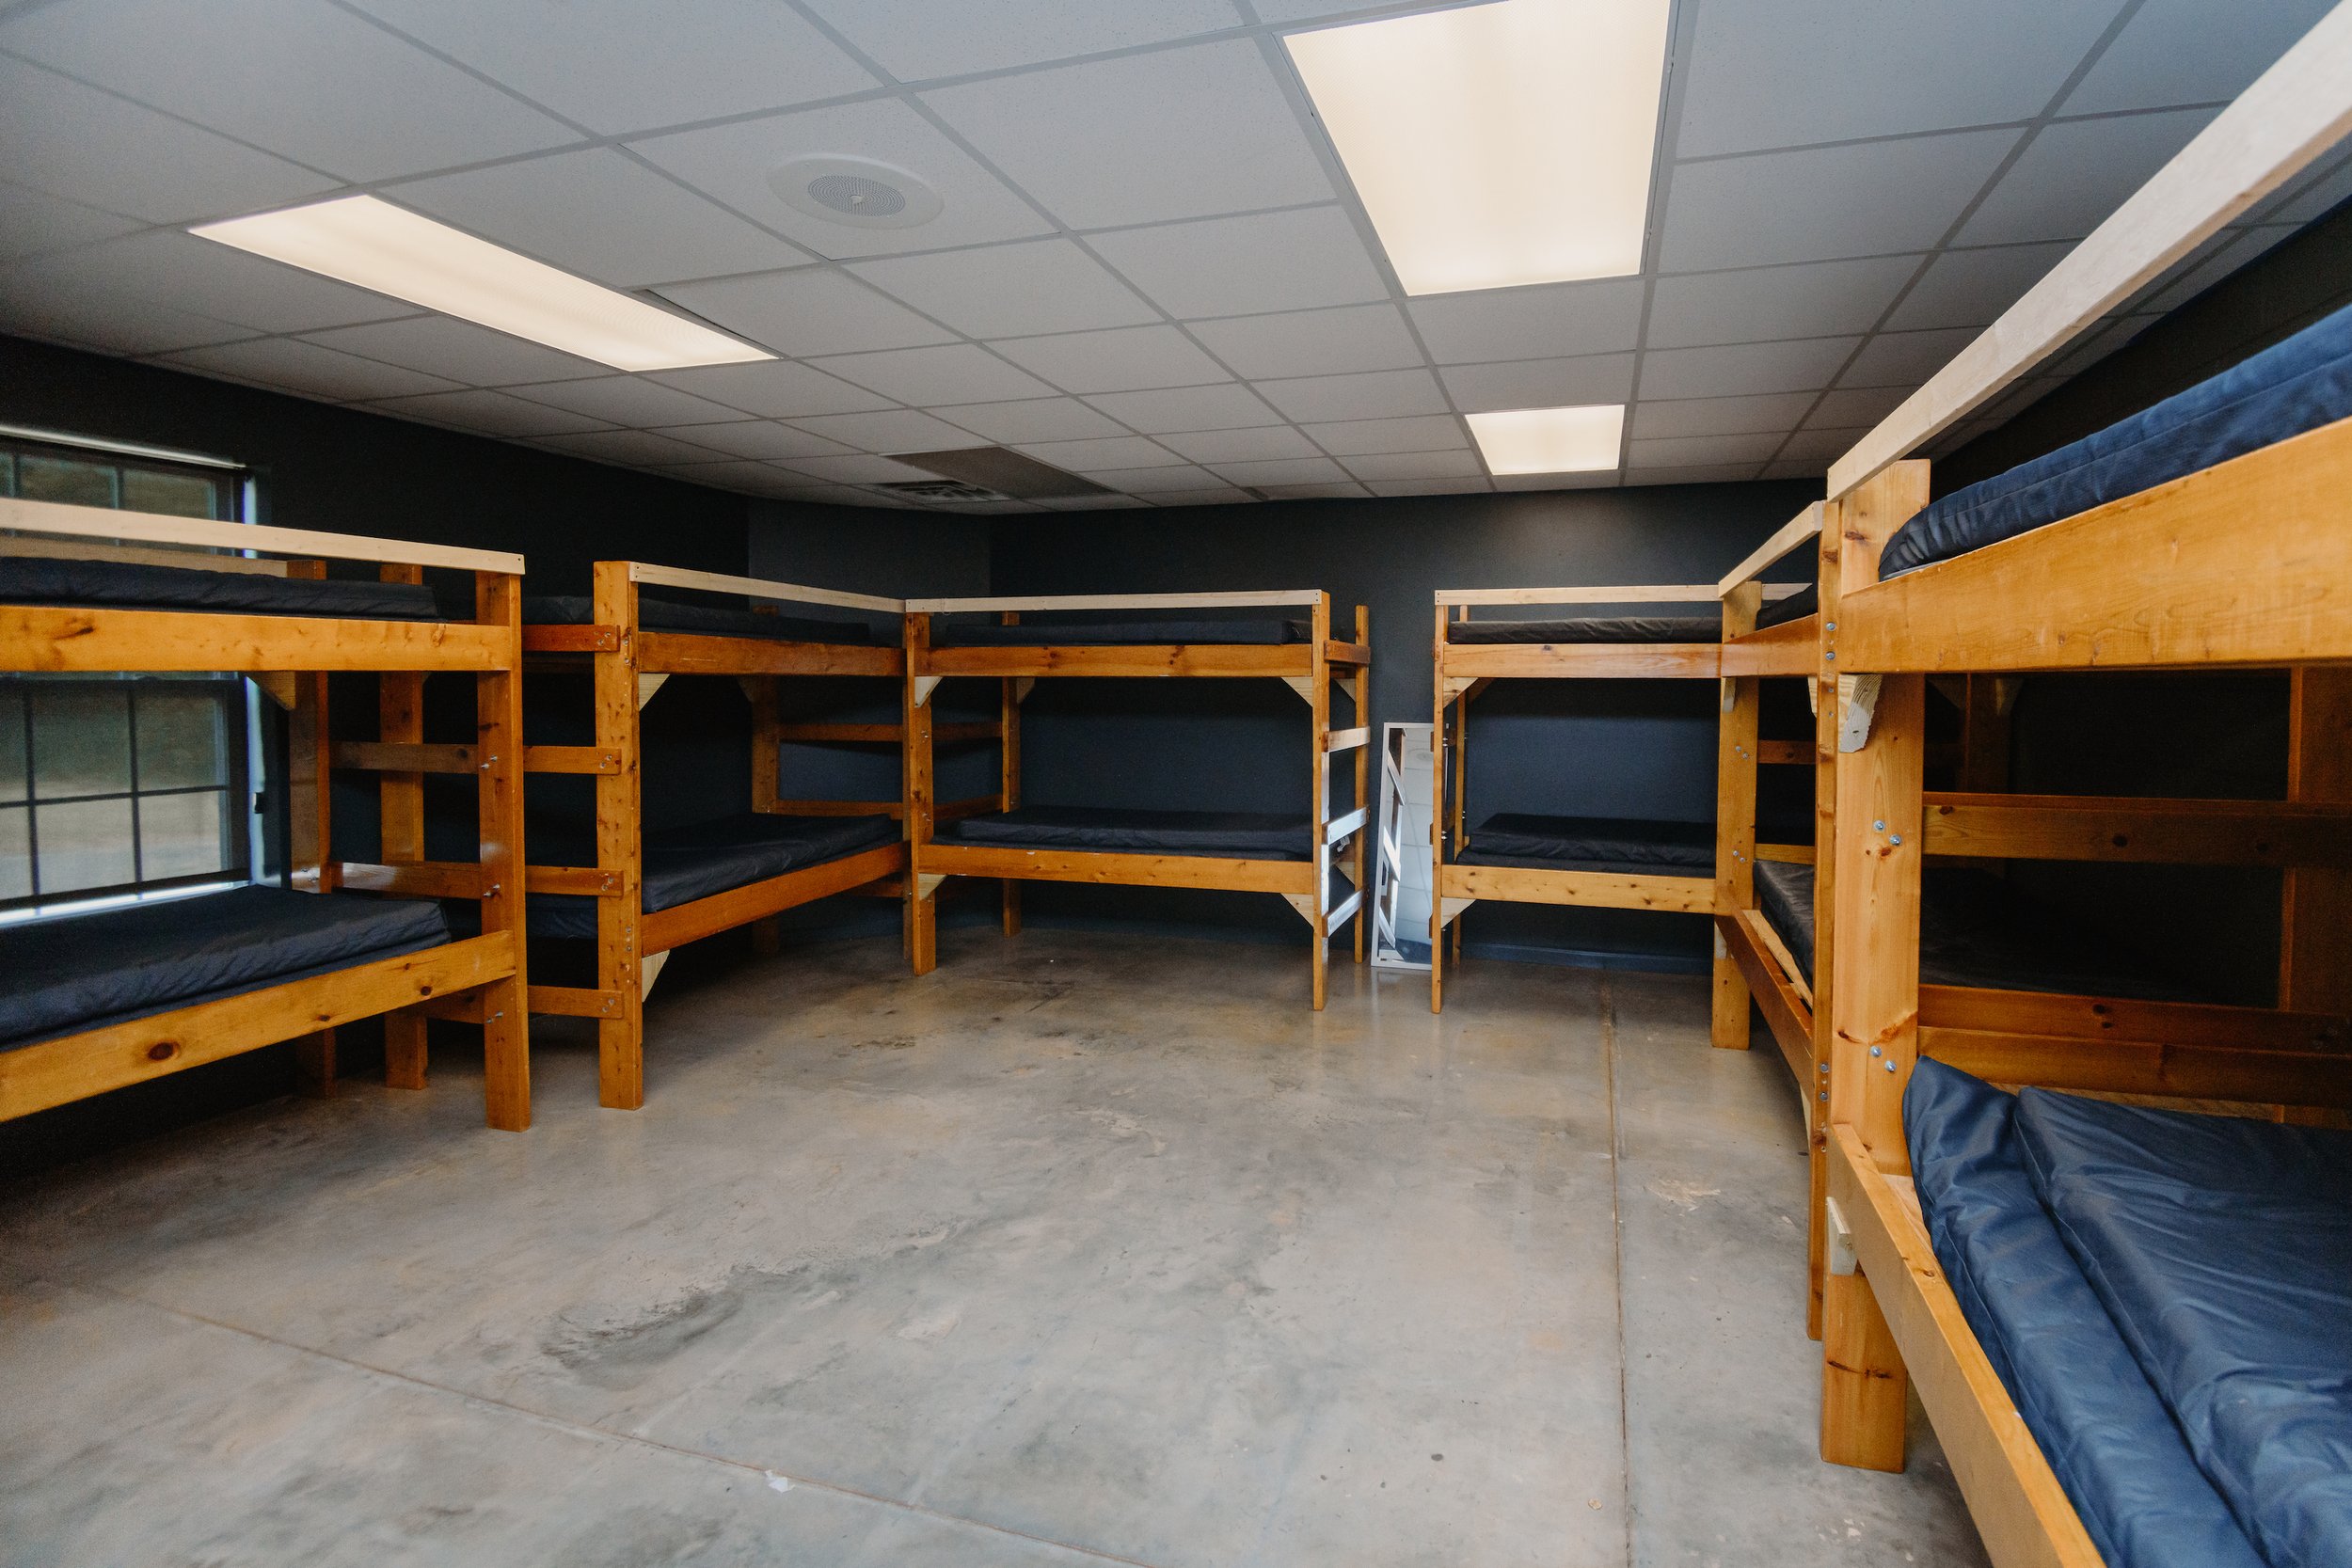 SPECIALTY CAMP/OVERFLOW BUNK ROOMS @ GYM